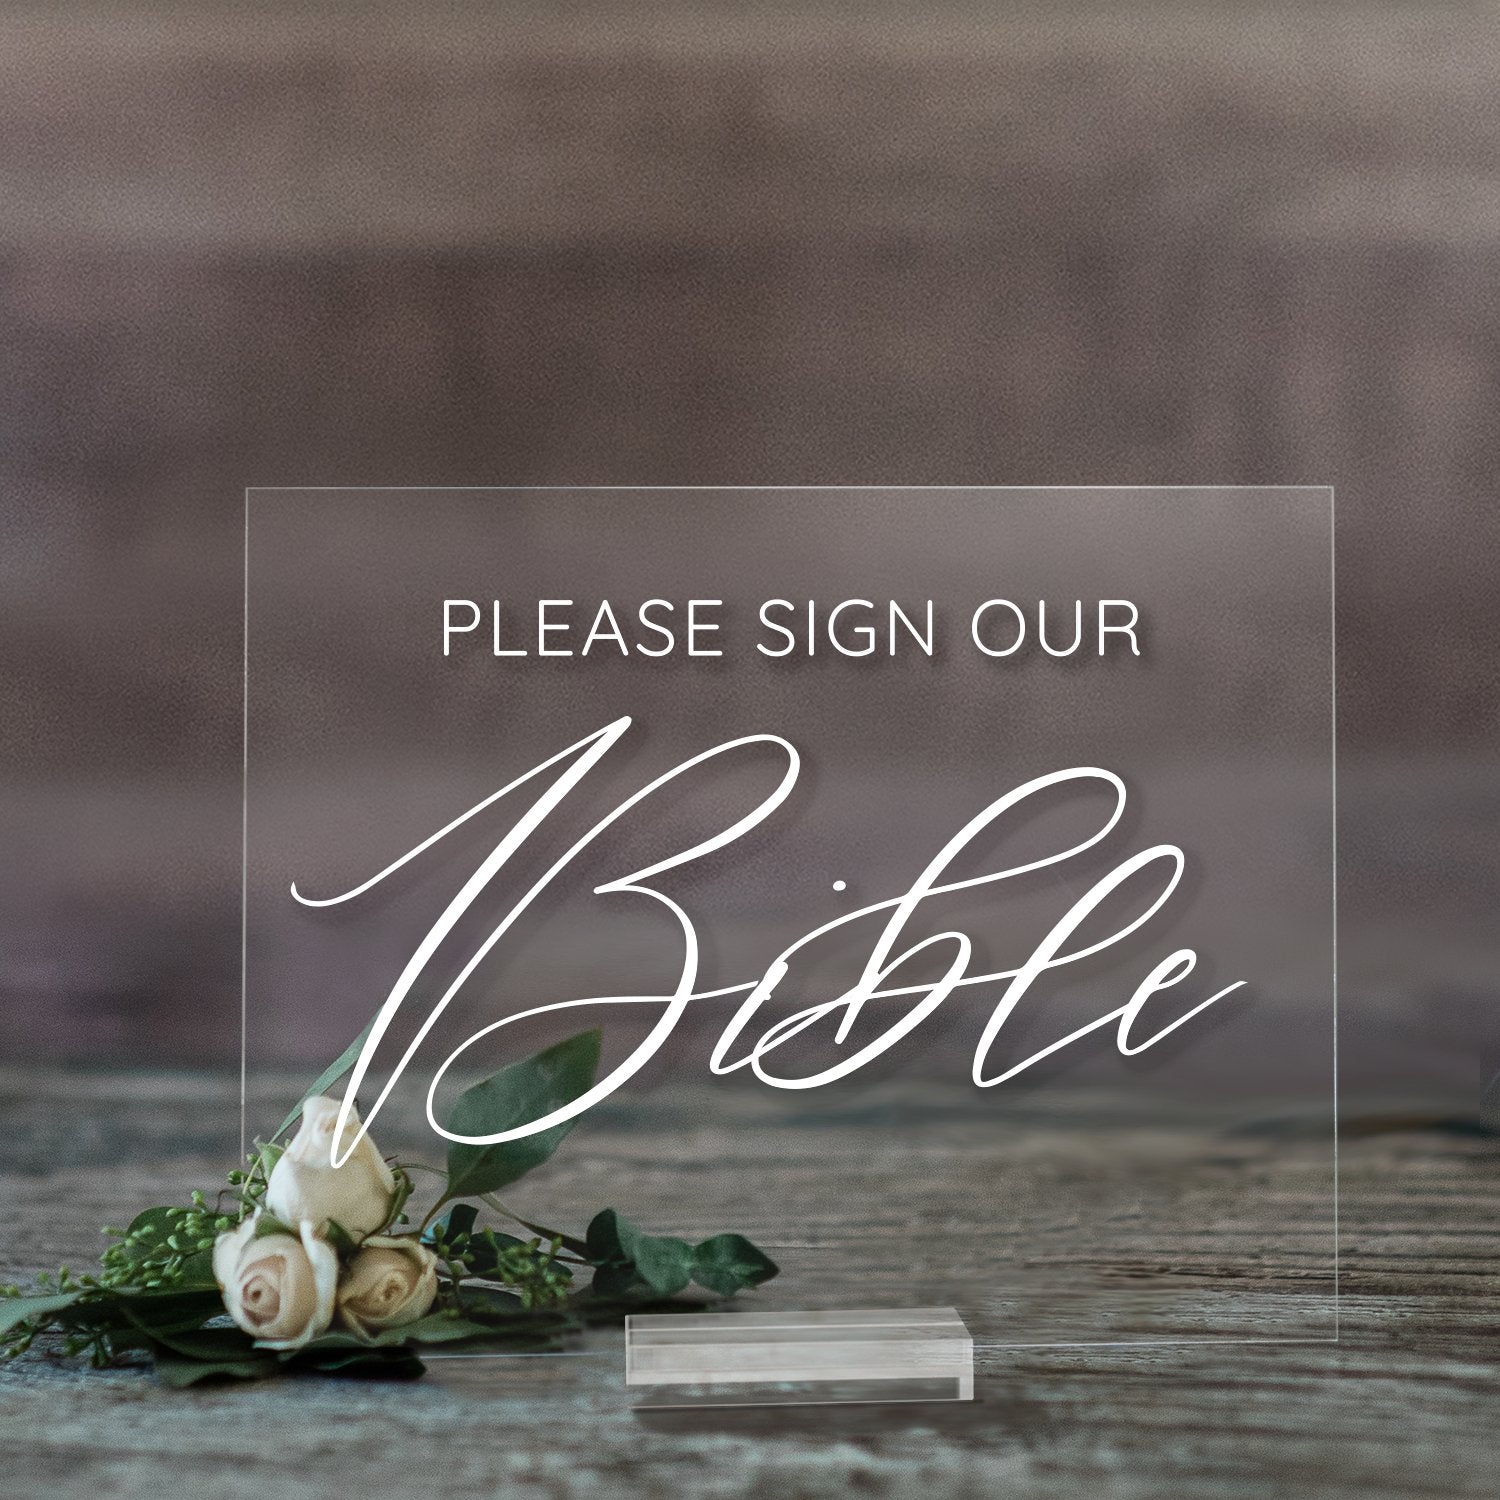 Please Sign Our Guestbook Acrylic Sign | Lucite Guestbook Sign | Wedding Decor | SCC-281 - SCC Signs